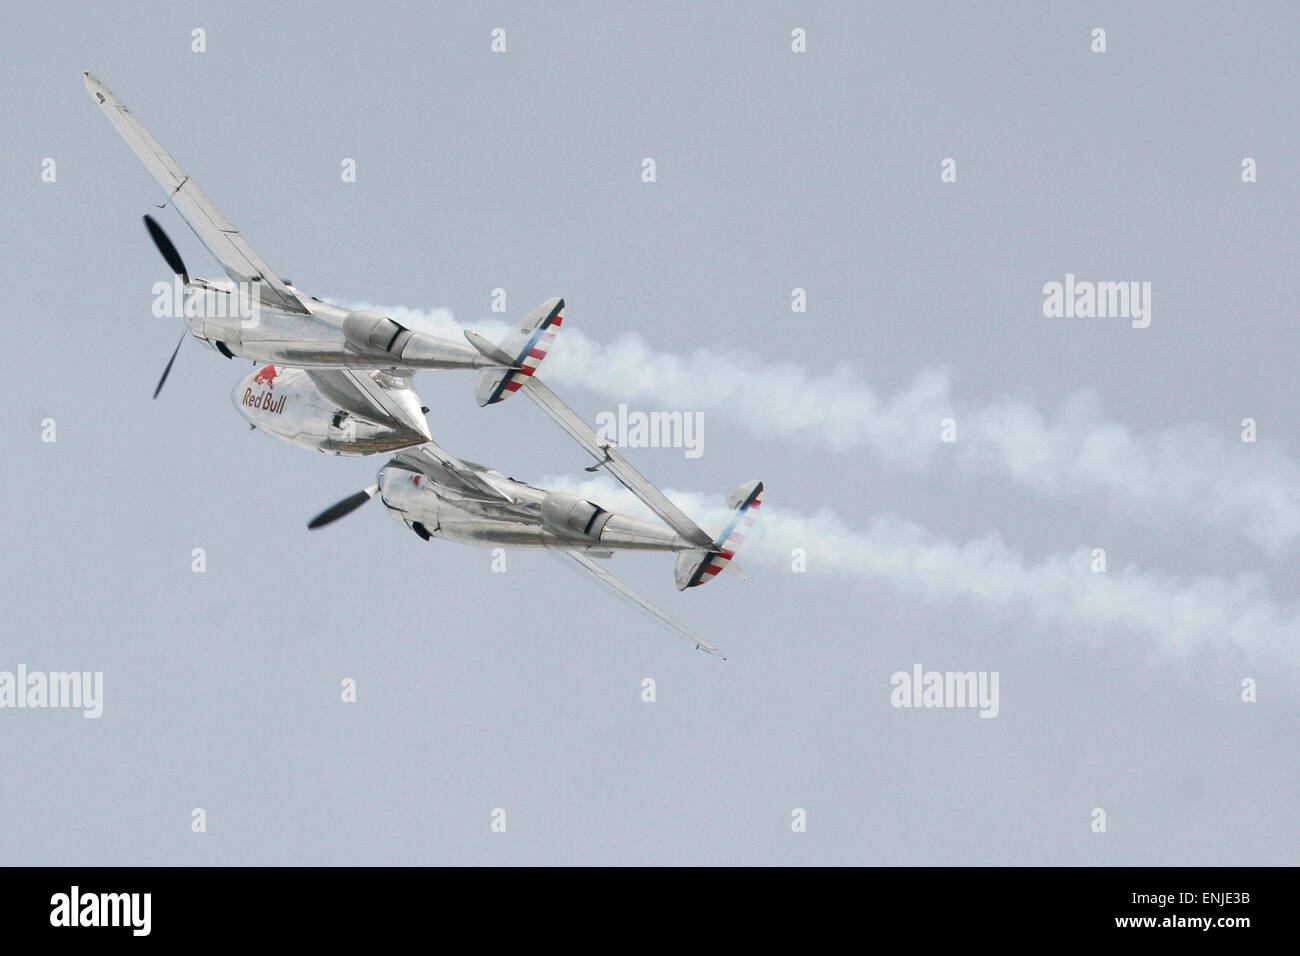 BUDAPEST, HUNGARY - MAY 1: P38 Lightning flying as part of the air show on May 1 celebration of 2014, Budapest, Hungary Stock Photo